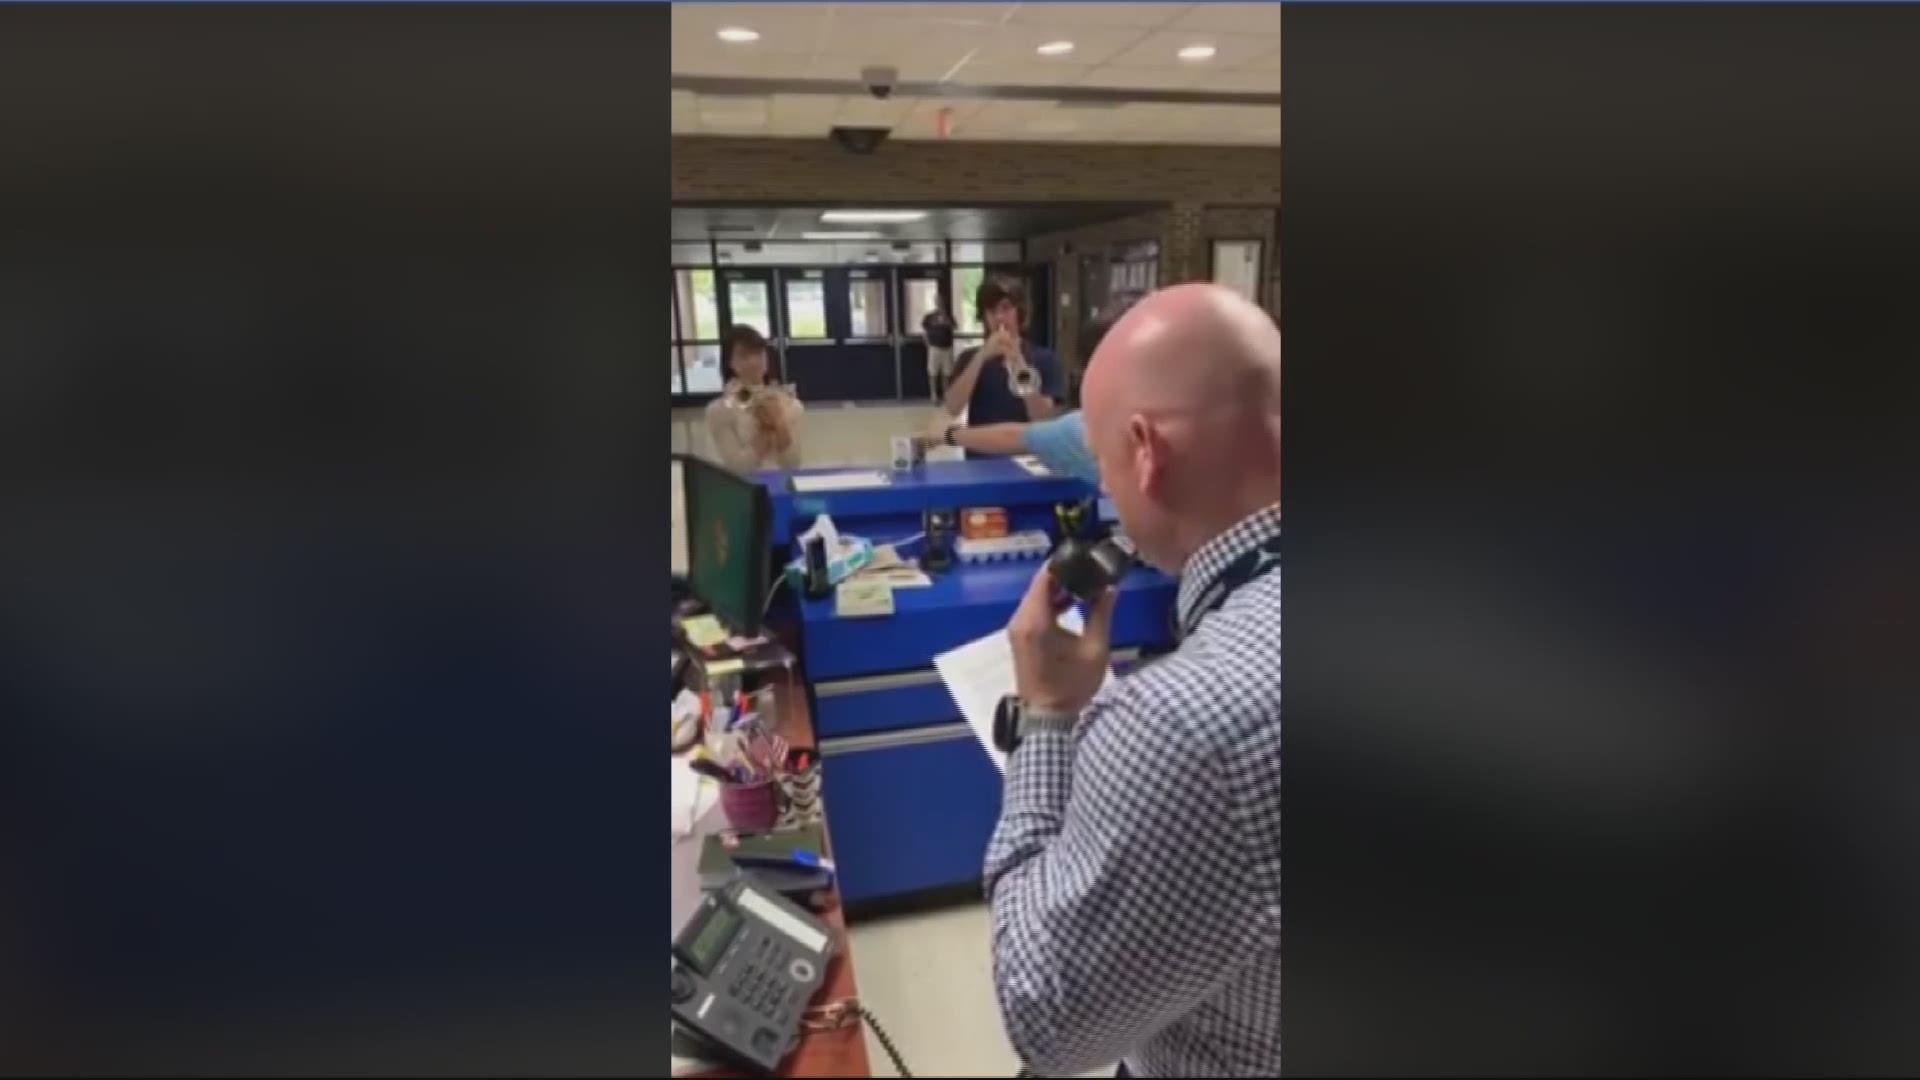 In a video posted to Facebook on Wednesday, one of Anderson County High School's assistant principals started the day by powerfully reading the timeline of events from that fateful day over the school's speaker system.